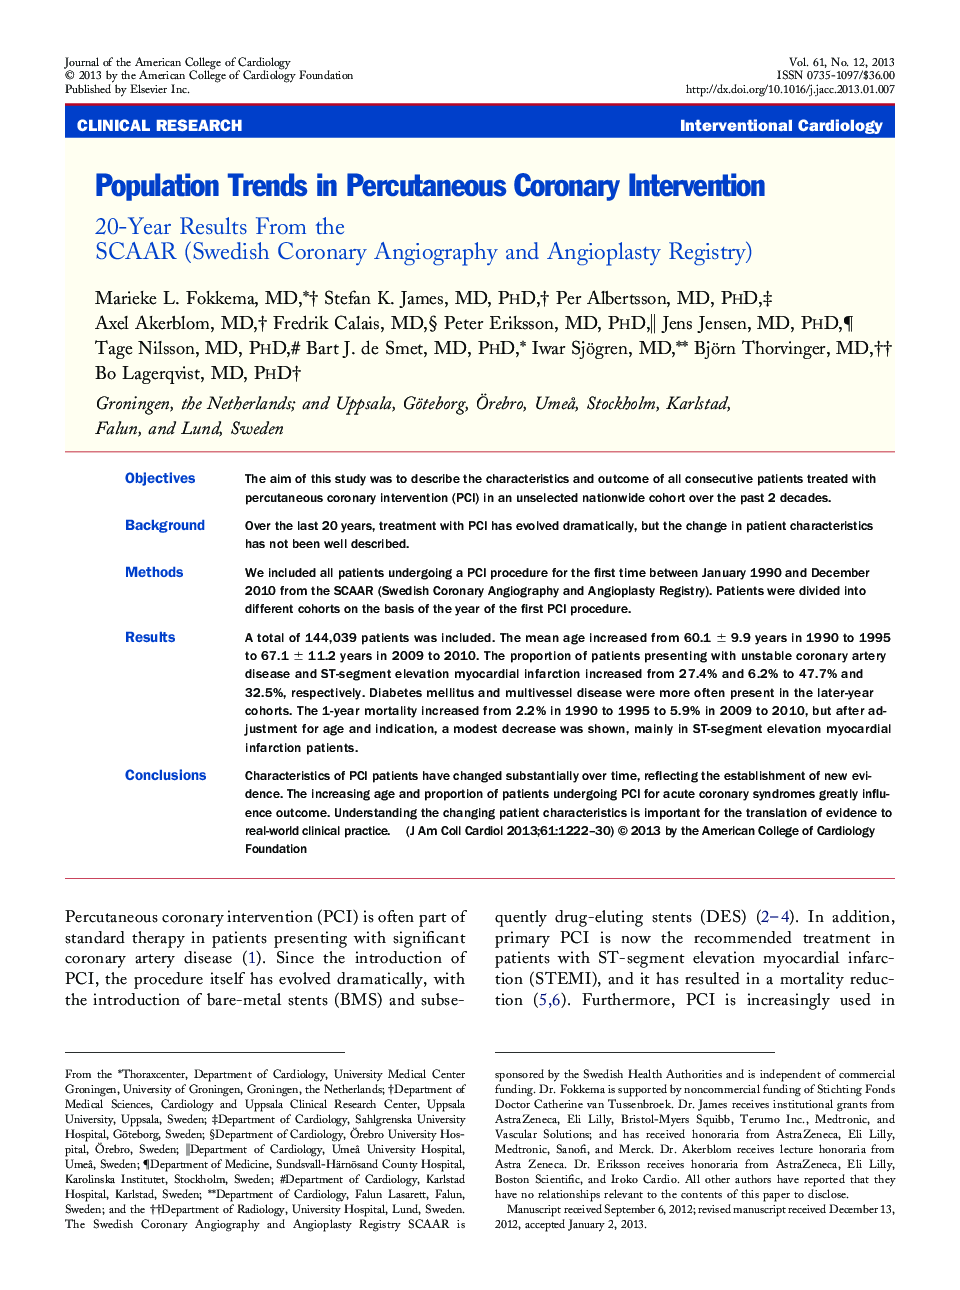 Population Trends in Percutaneous Coronary Intervention : 20-Year Results From the SCAAR (Swedish Coronary Angiography and Angioplasty Registry)